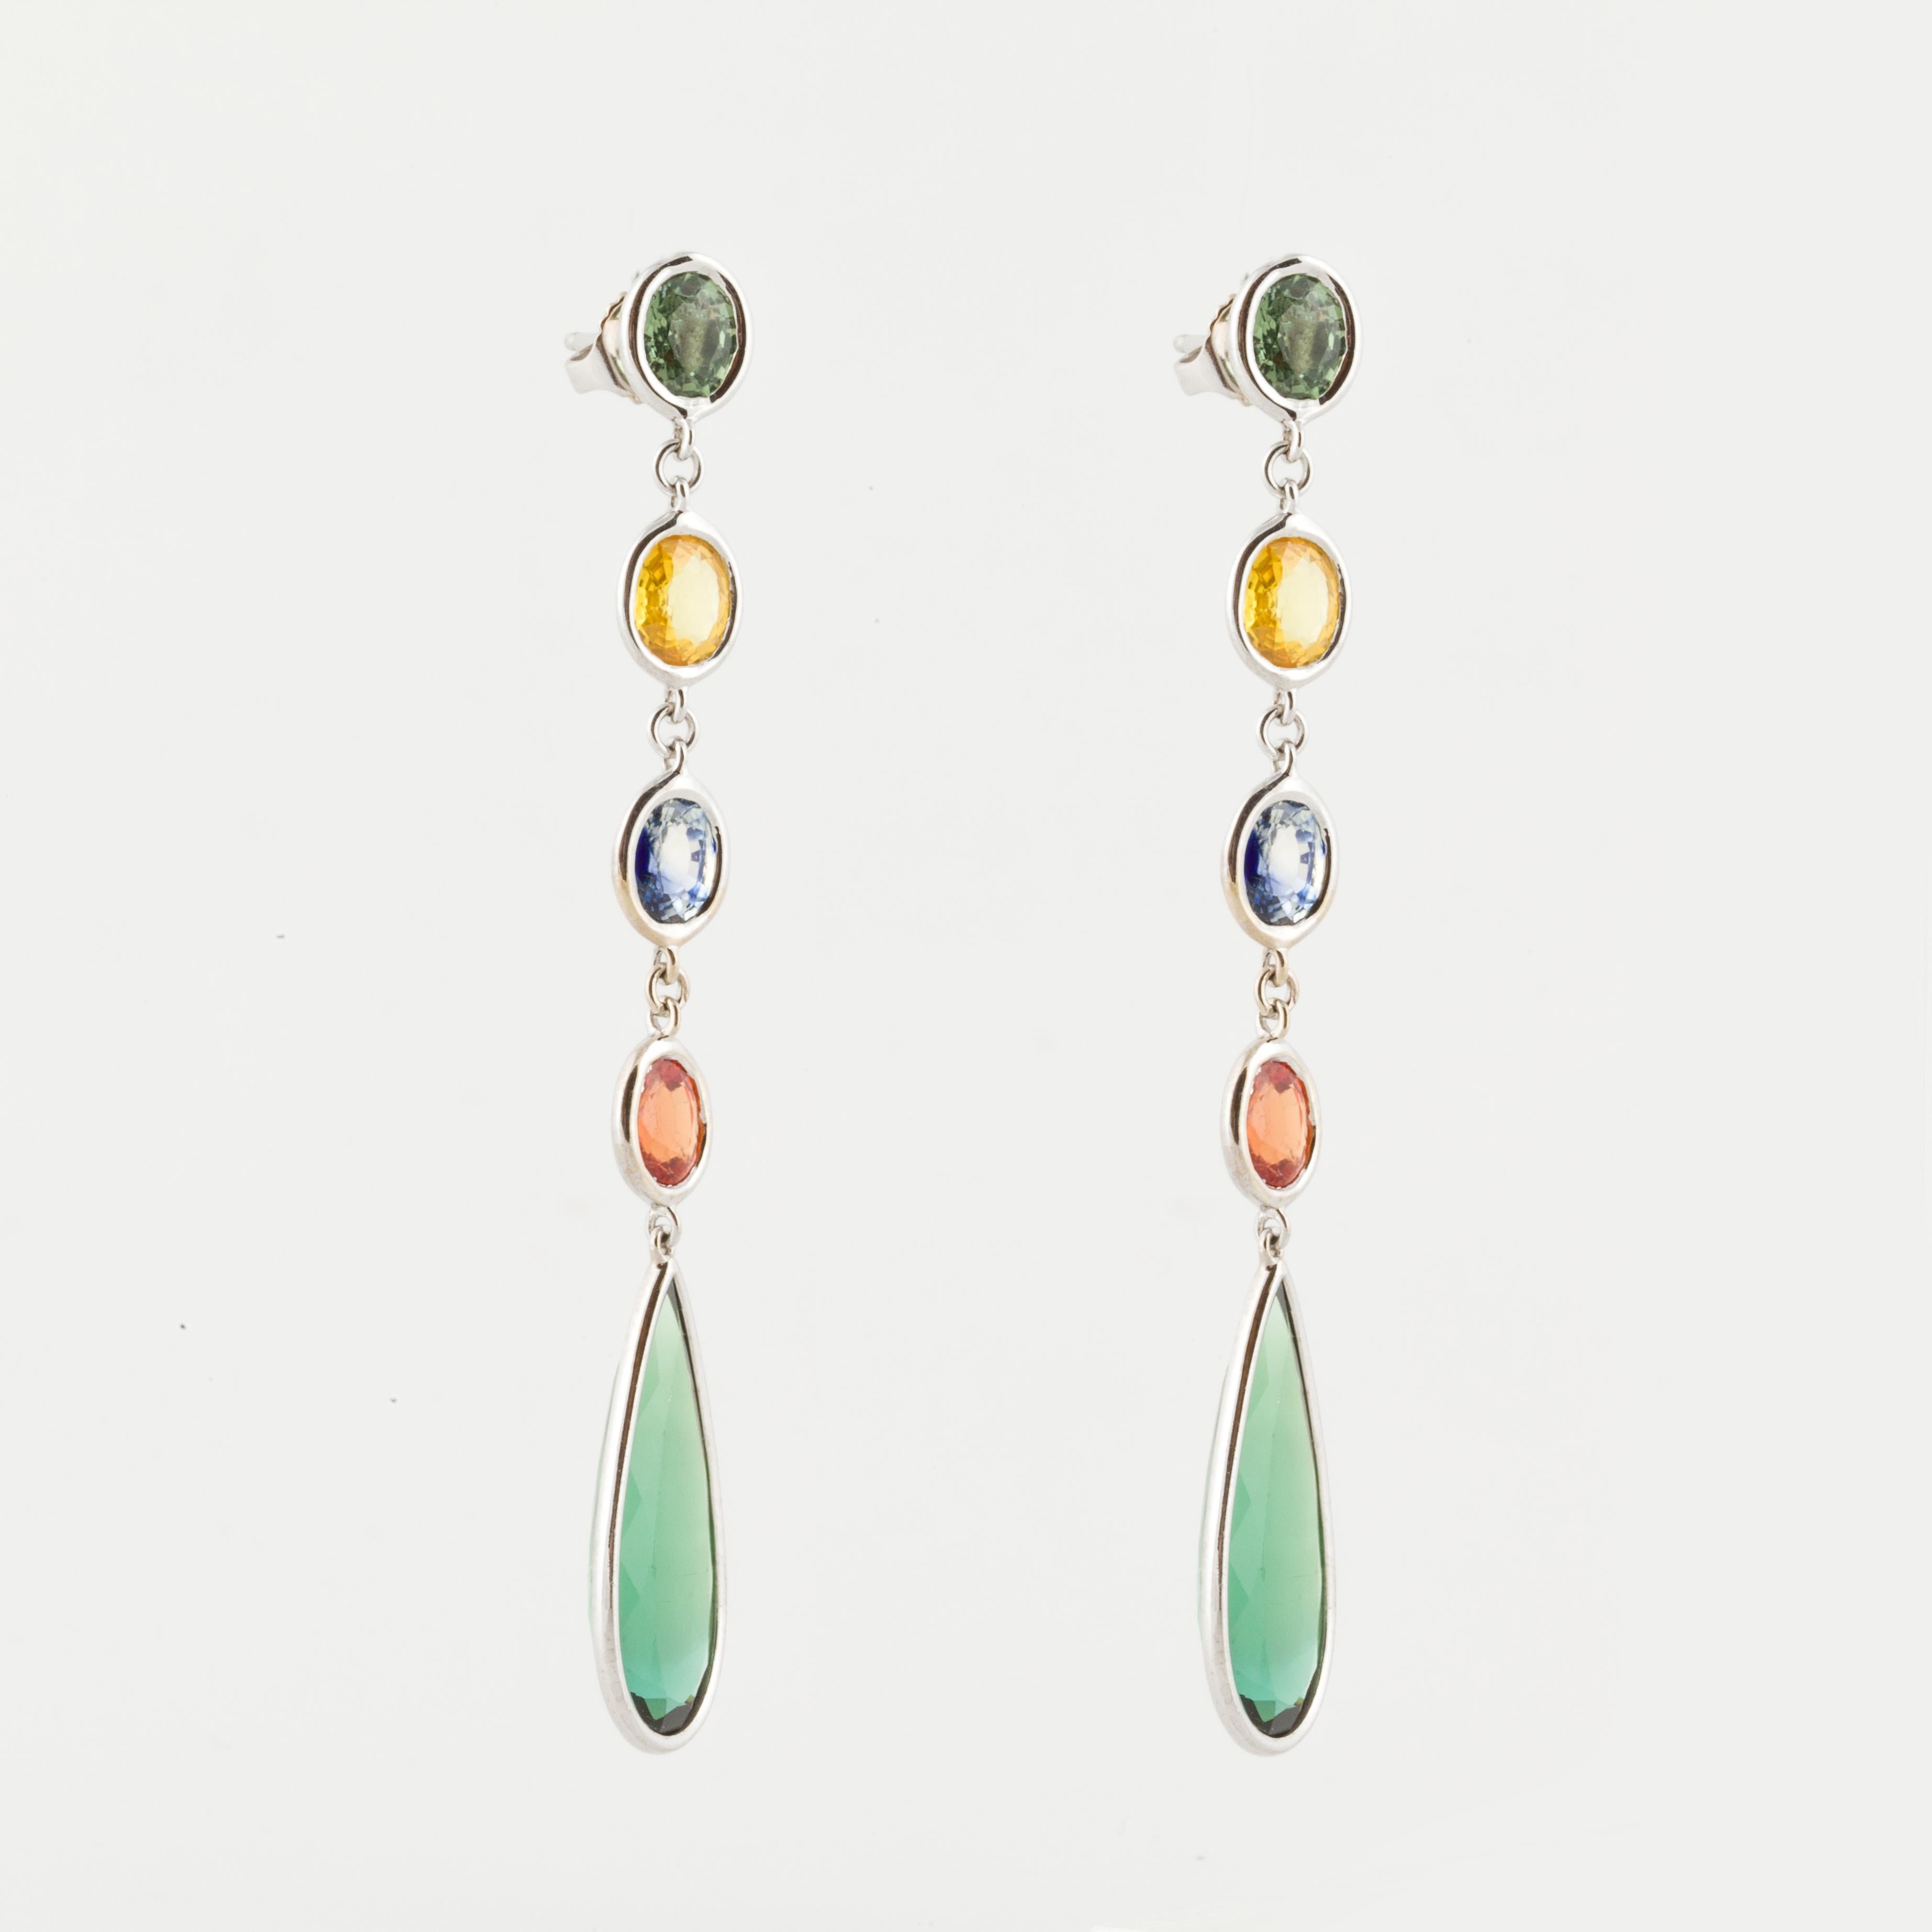 18K white gold drop earrings featuring green, yellow, blue and orange faceted bezel-set sapphires which total 4.50 carats.  The bottom drops are faceted pear-shaped green tourmalines that total 9.80 carats.  Measure 2 3/4 inches long and 3/8 inches